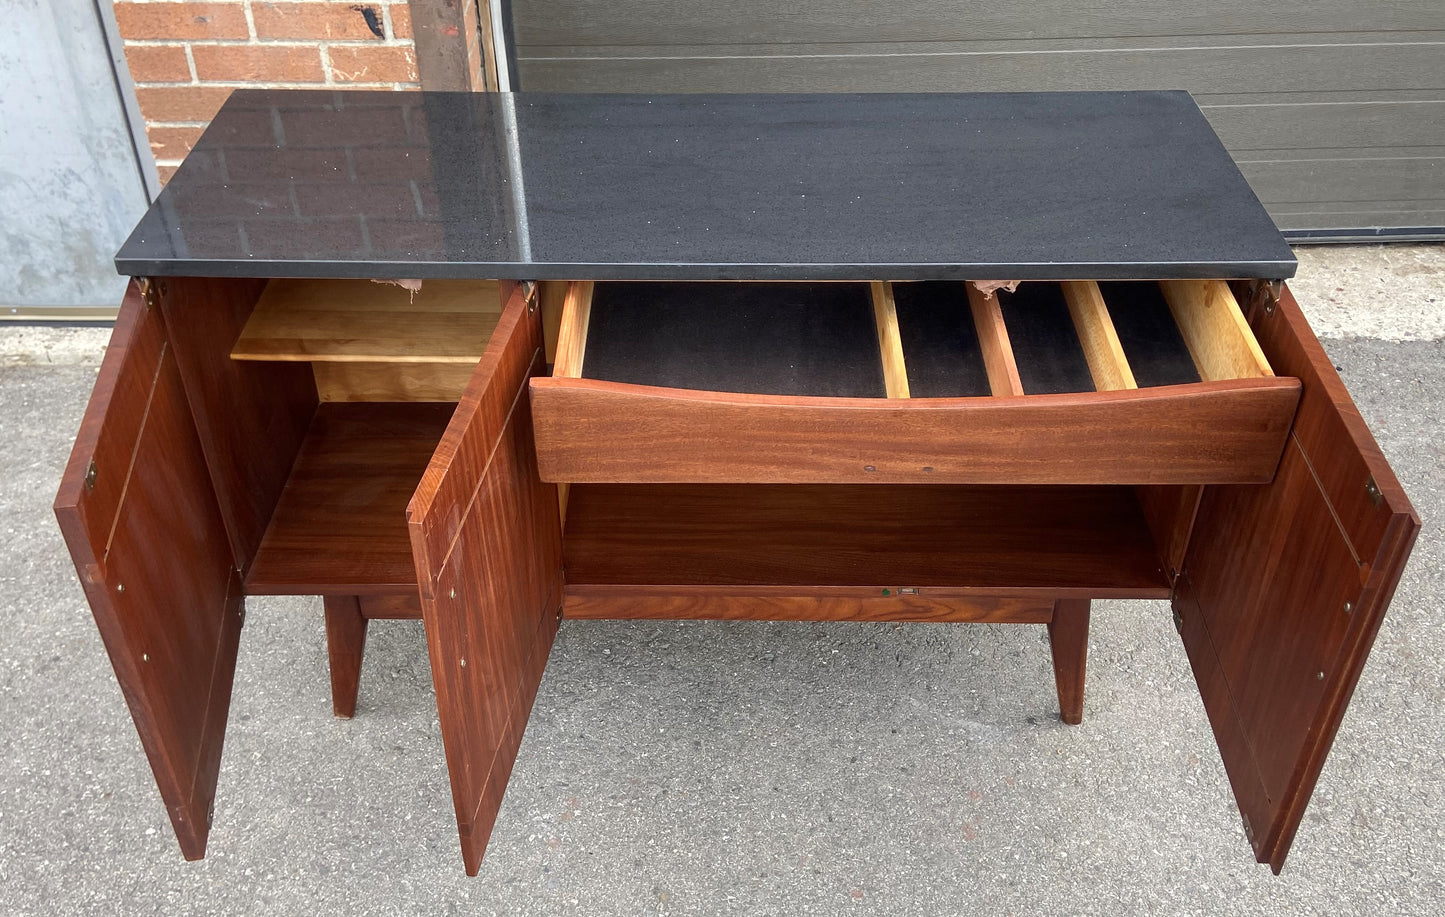 REFINISHED Mid Century Modern SOLID TEAK Buffet 49" w Stone Top